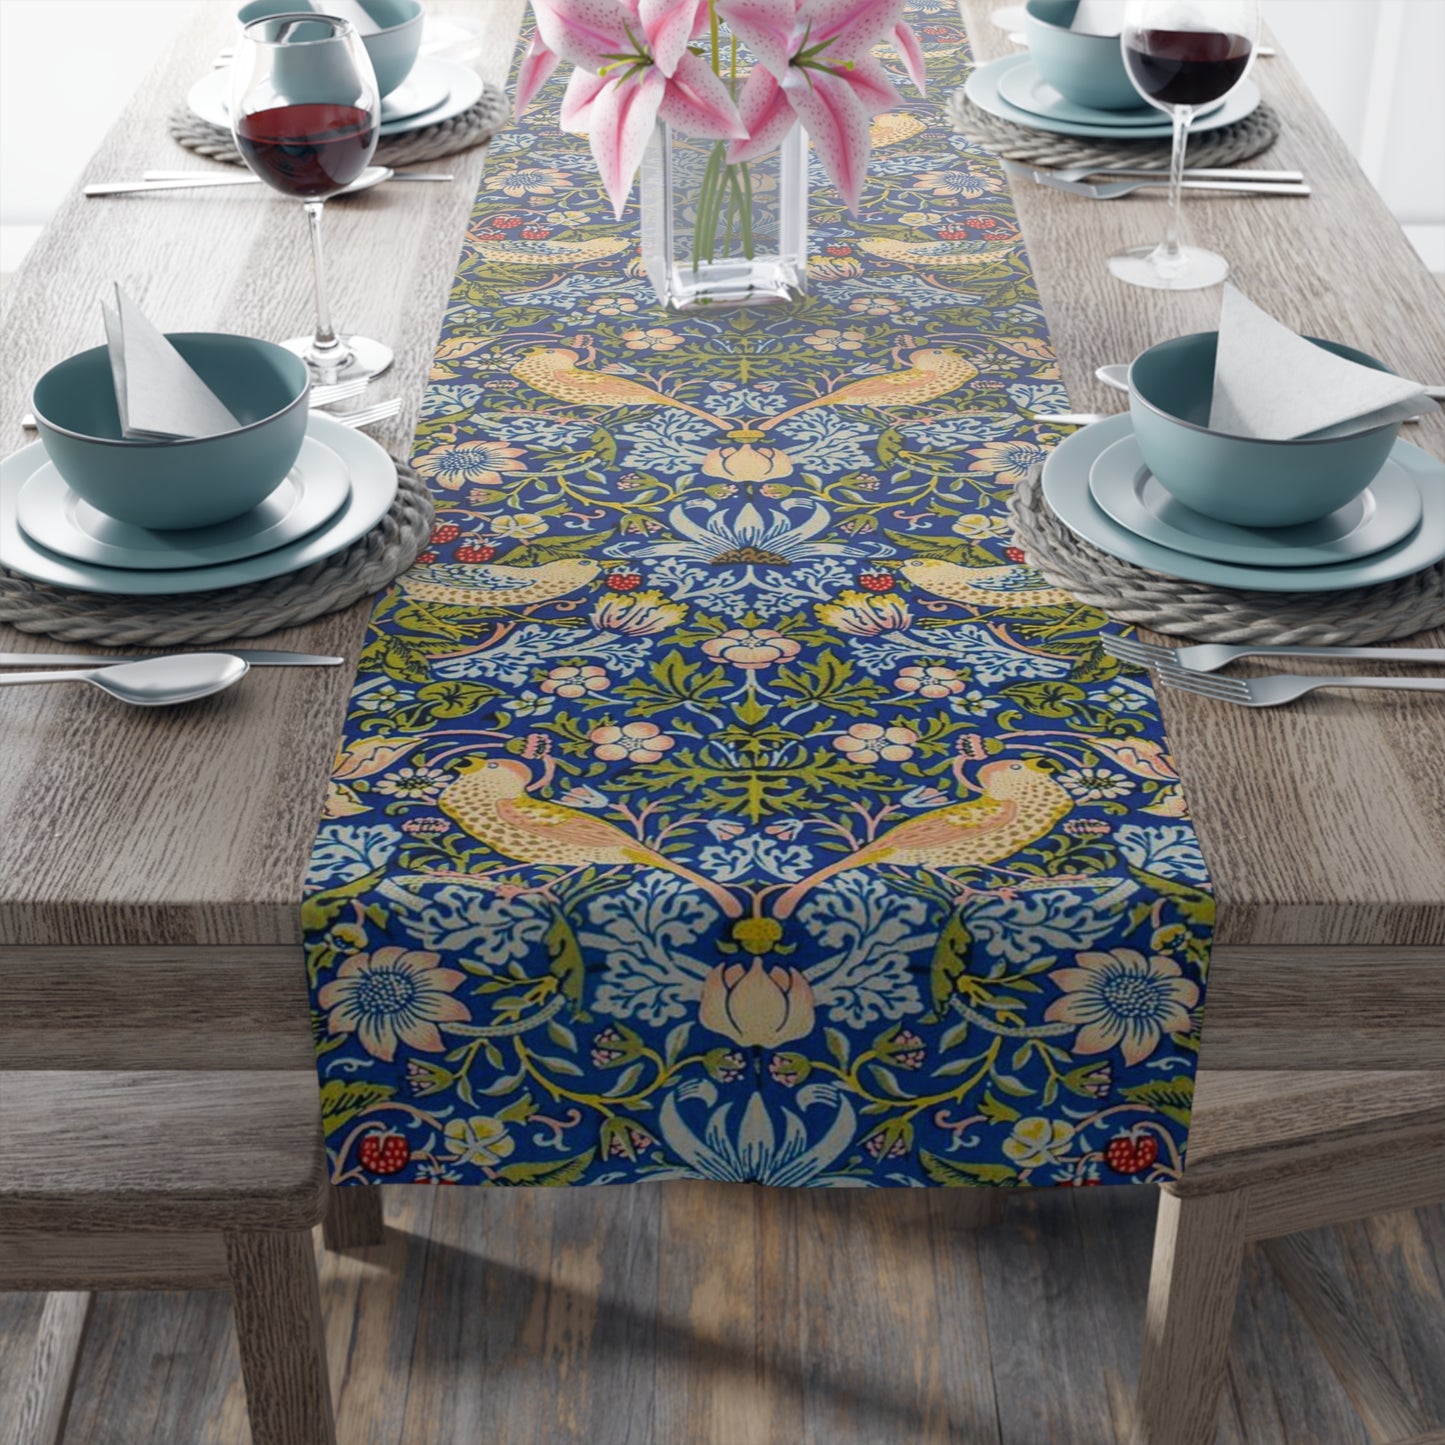 william-morris-co-table-runner-strawberry-thief-collection-indigo-4